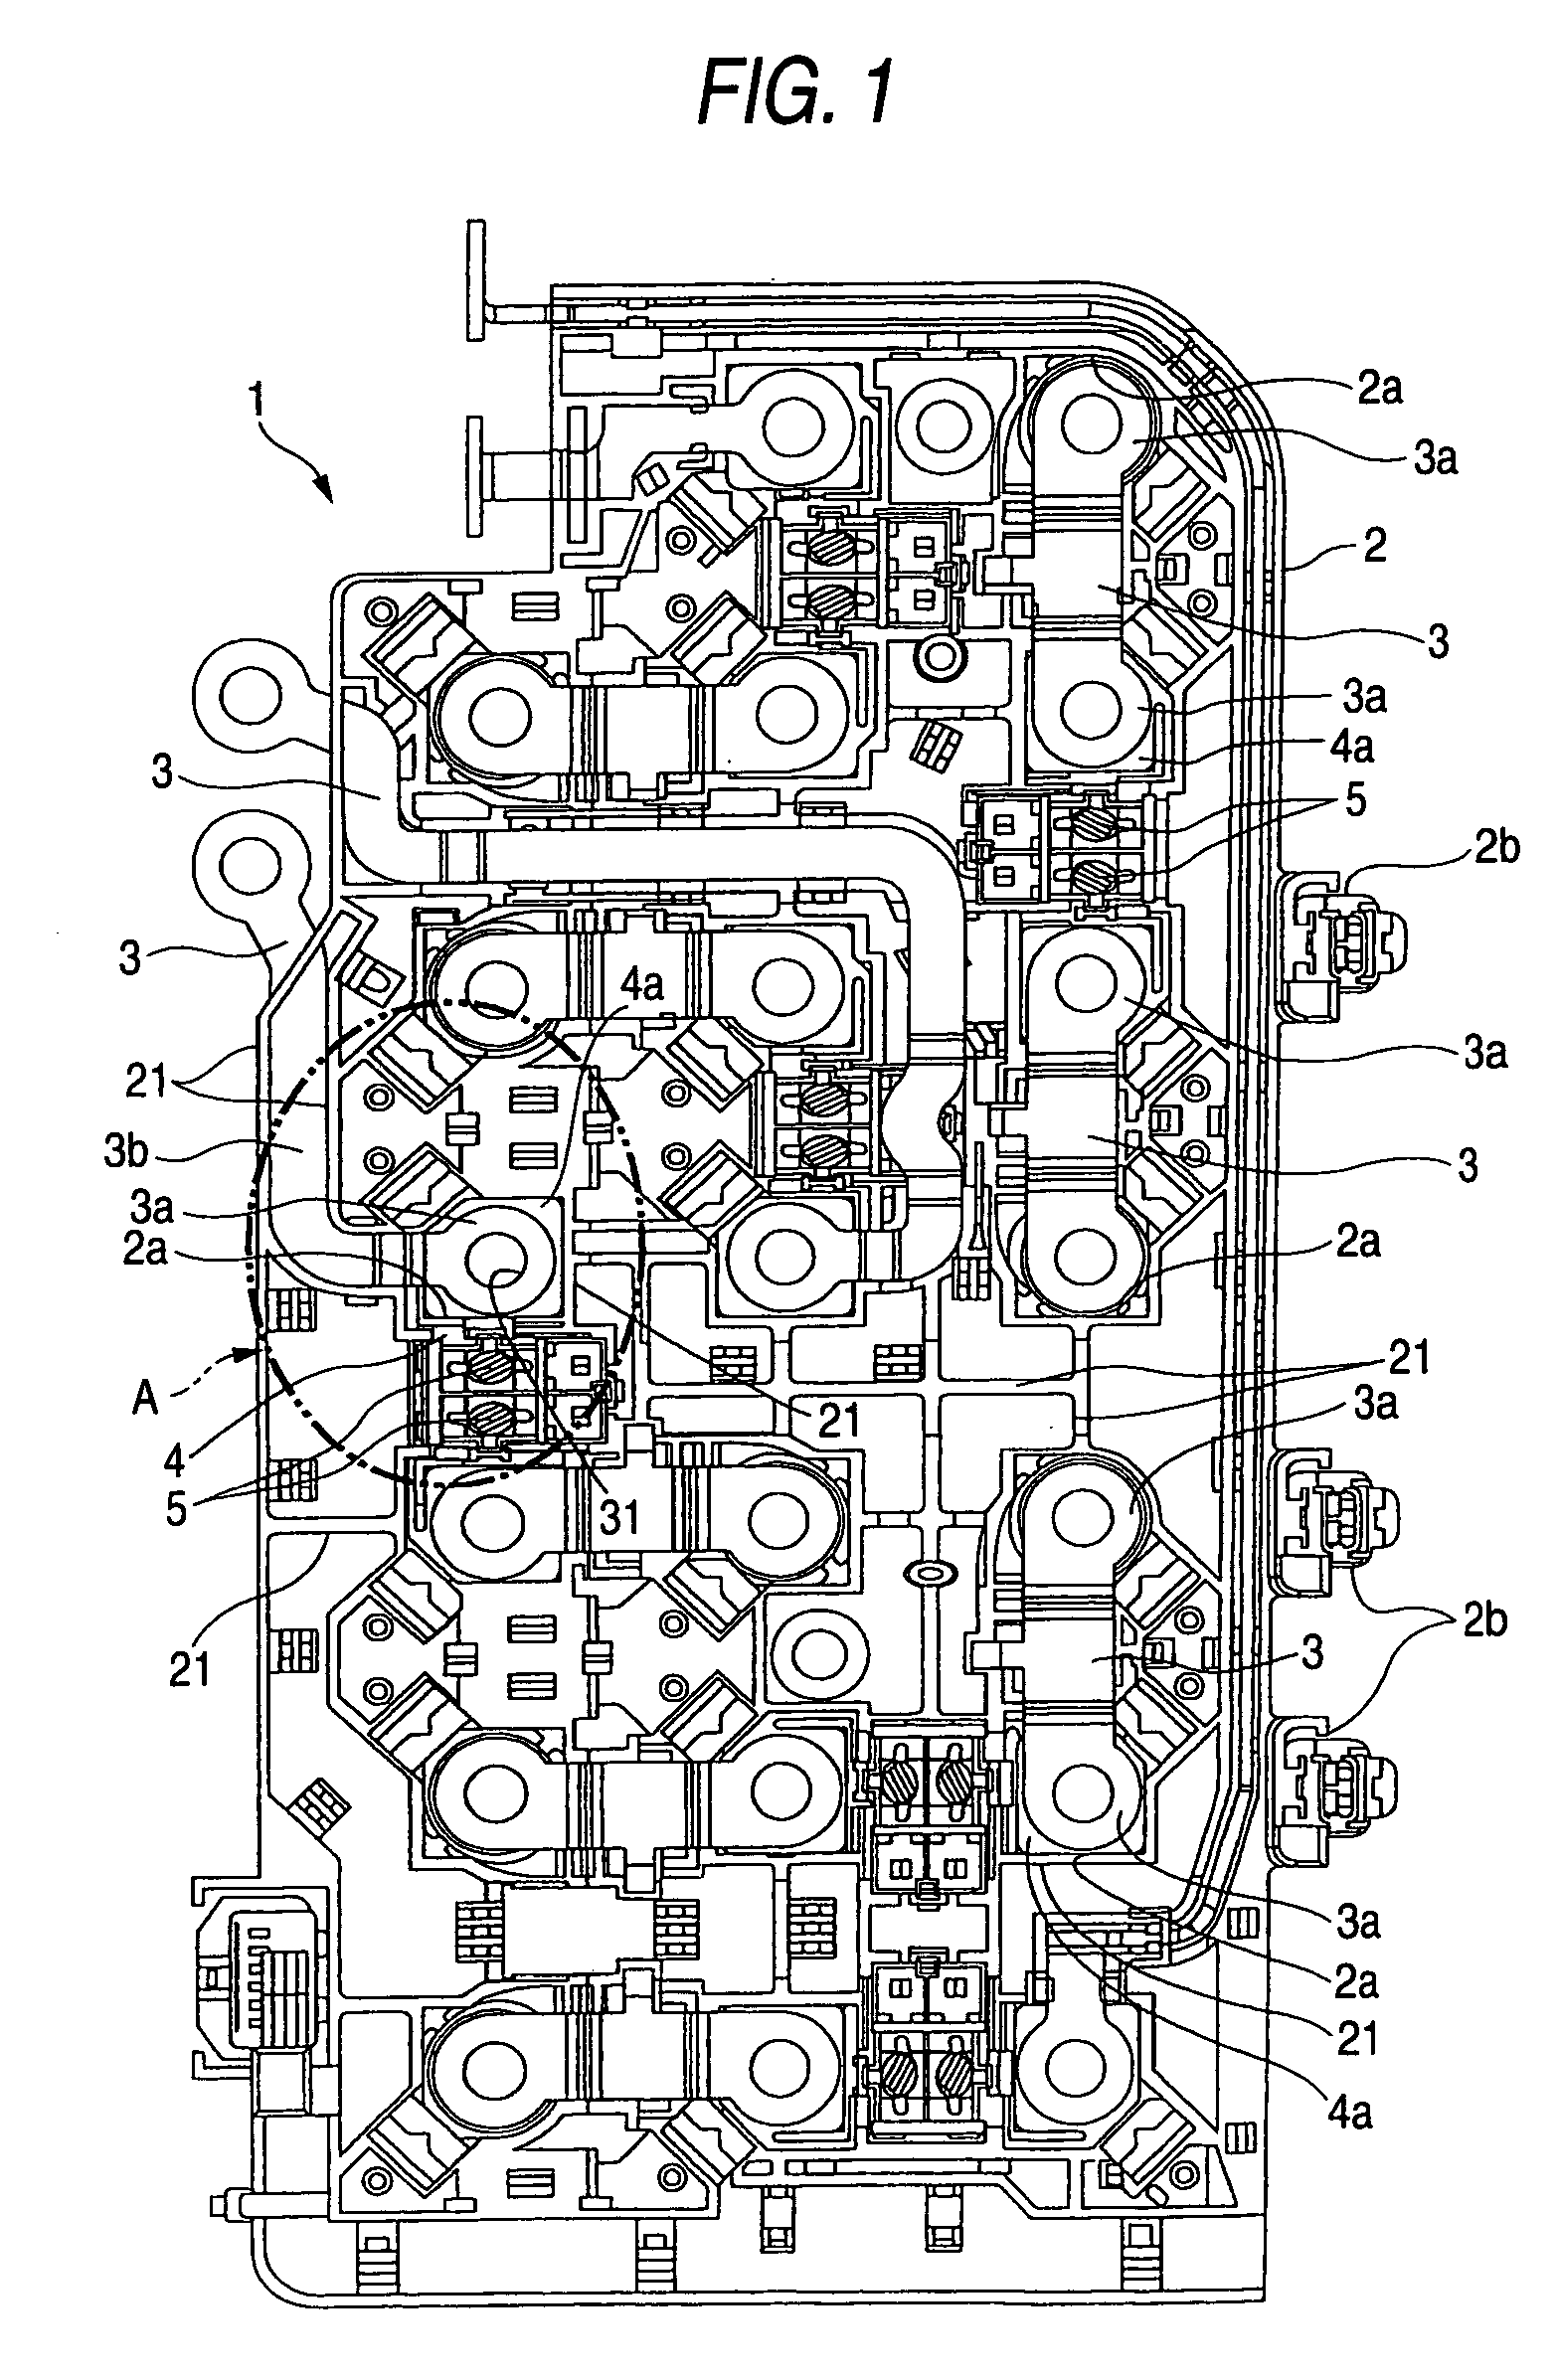 Battery connection plate with voltage detection element